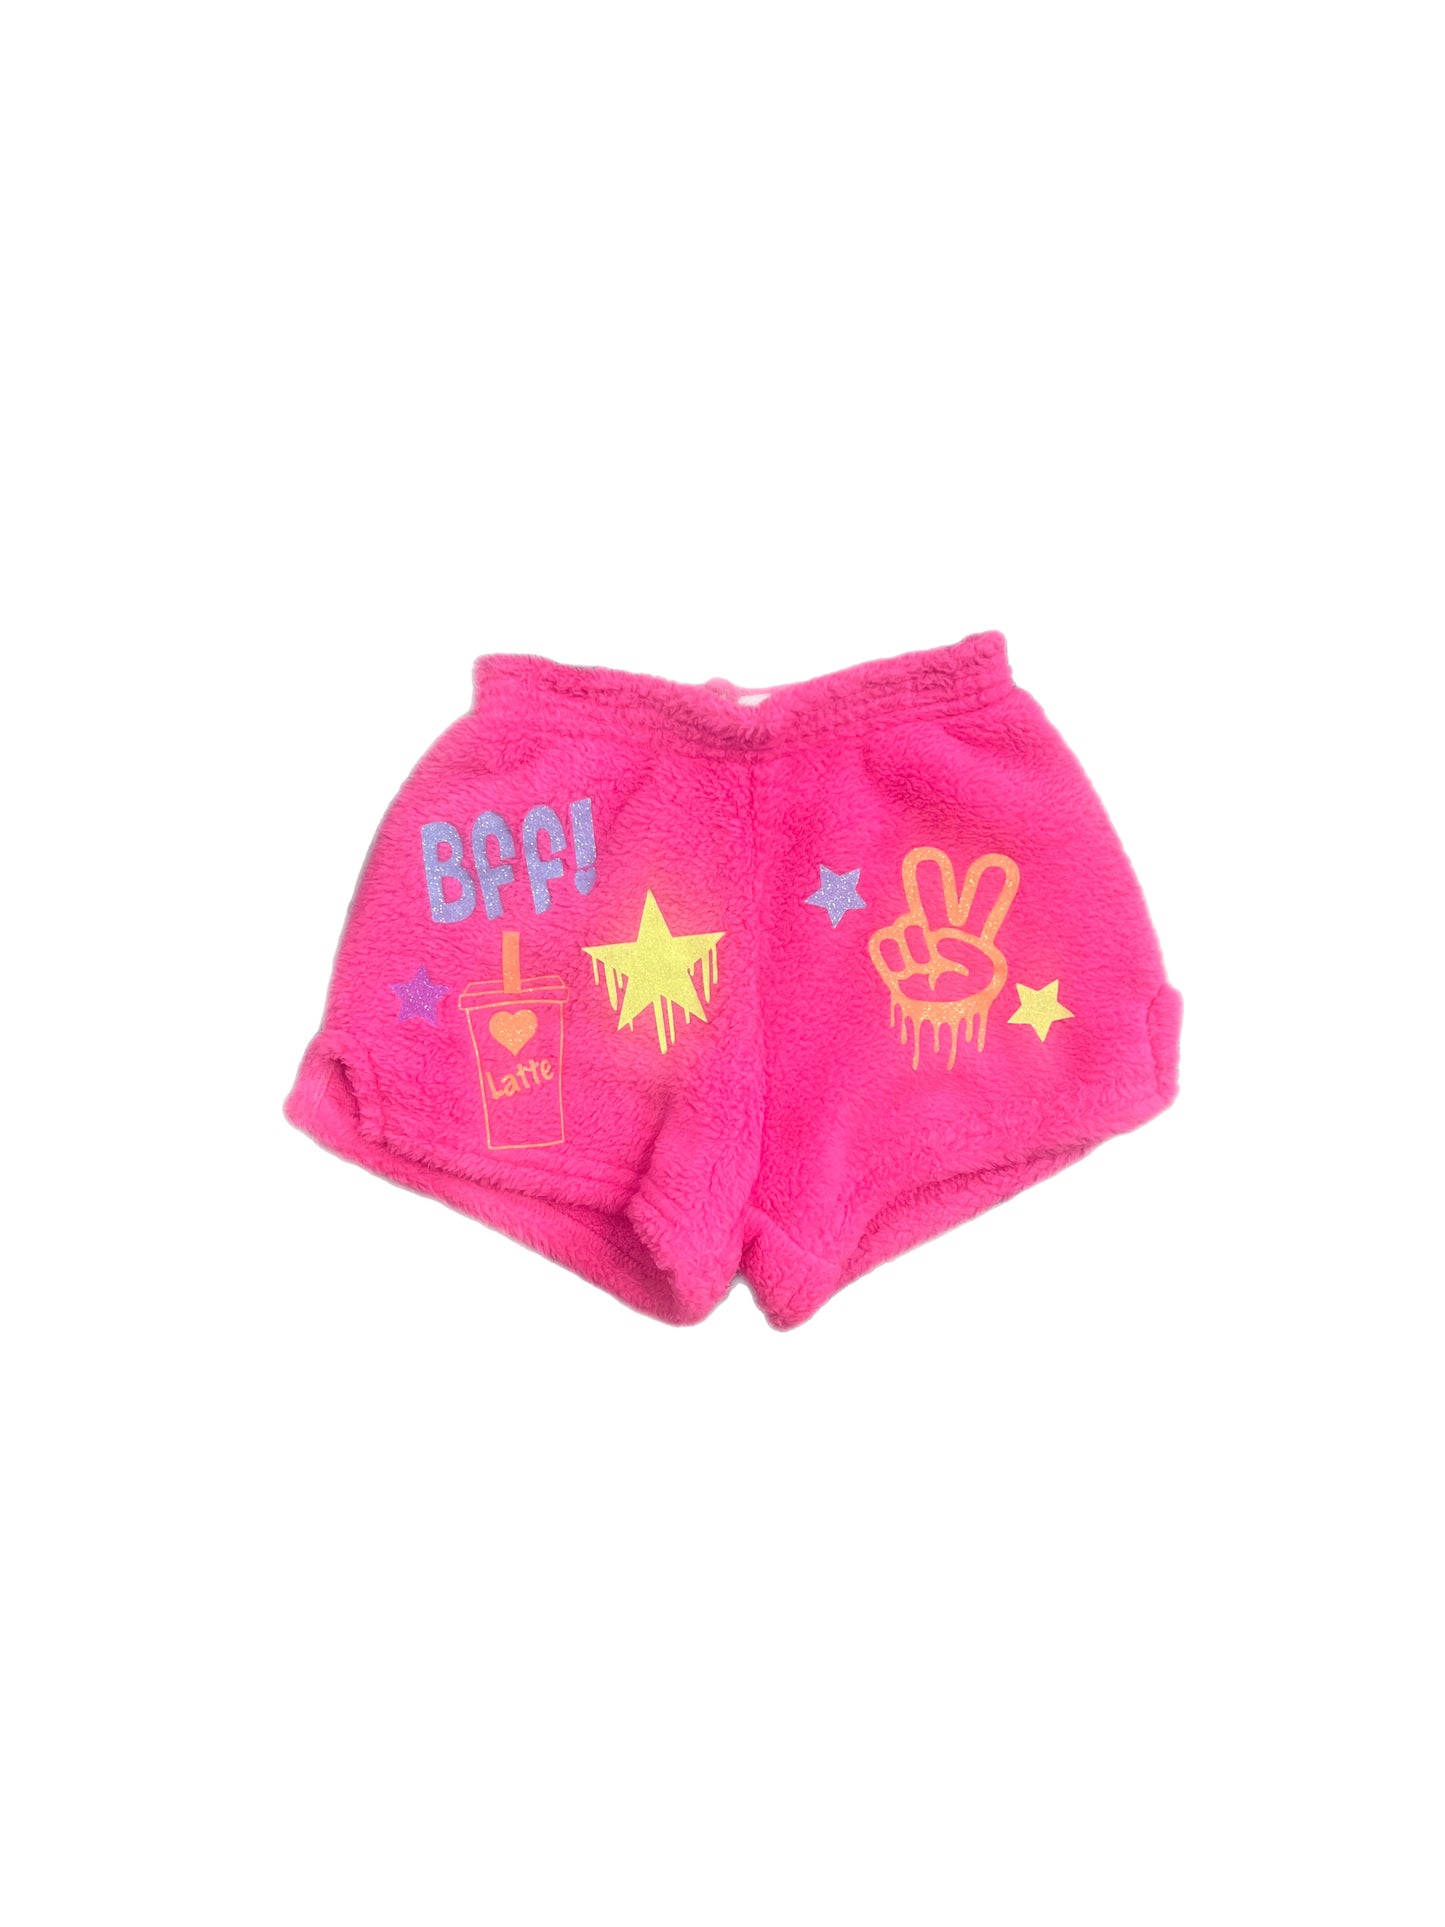 Made with Love and Kisses Neon Pink BFF/Latte/Peace/Stars Girls Shorts